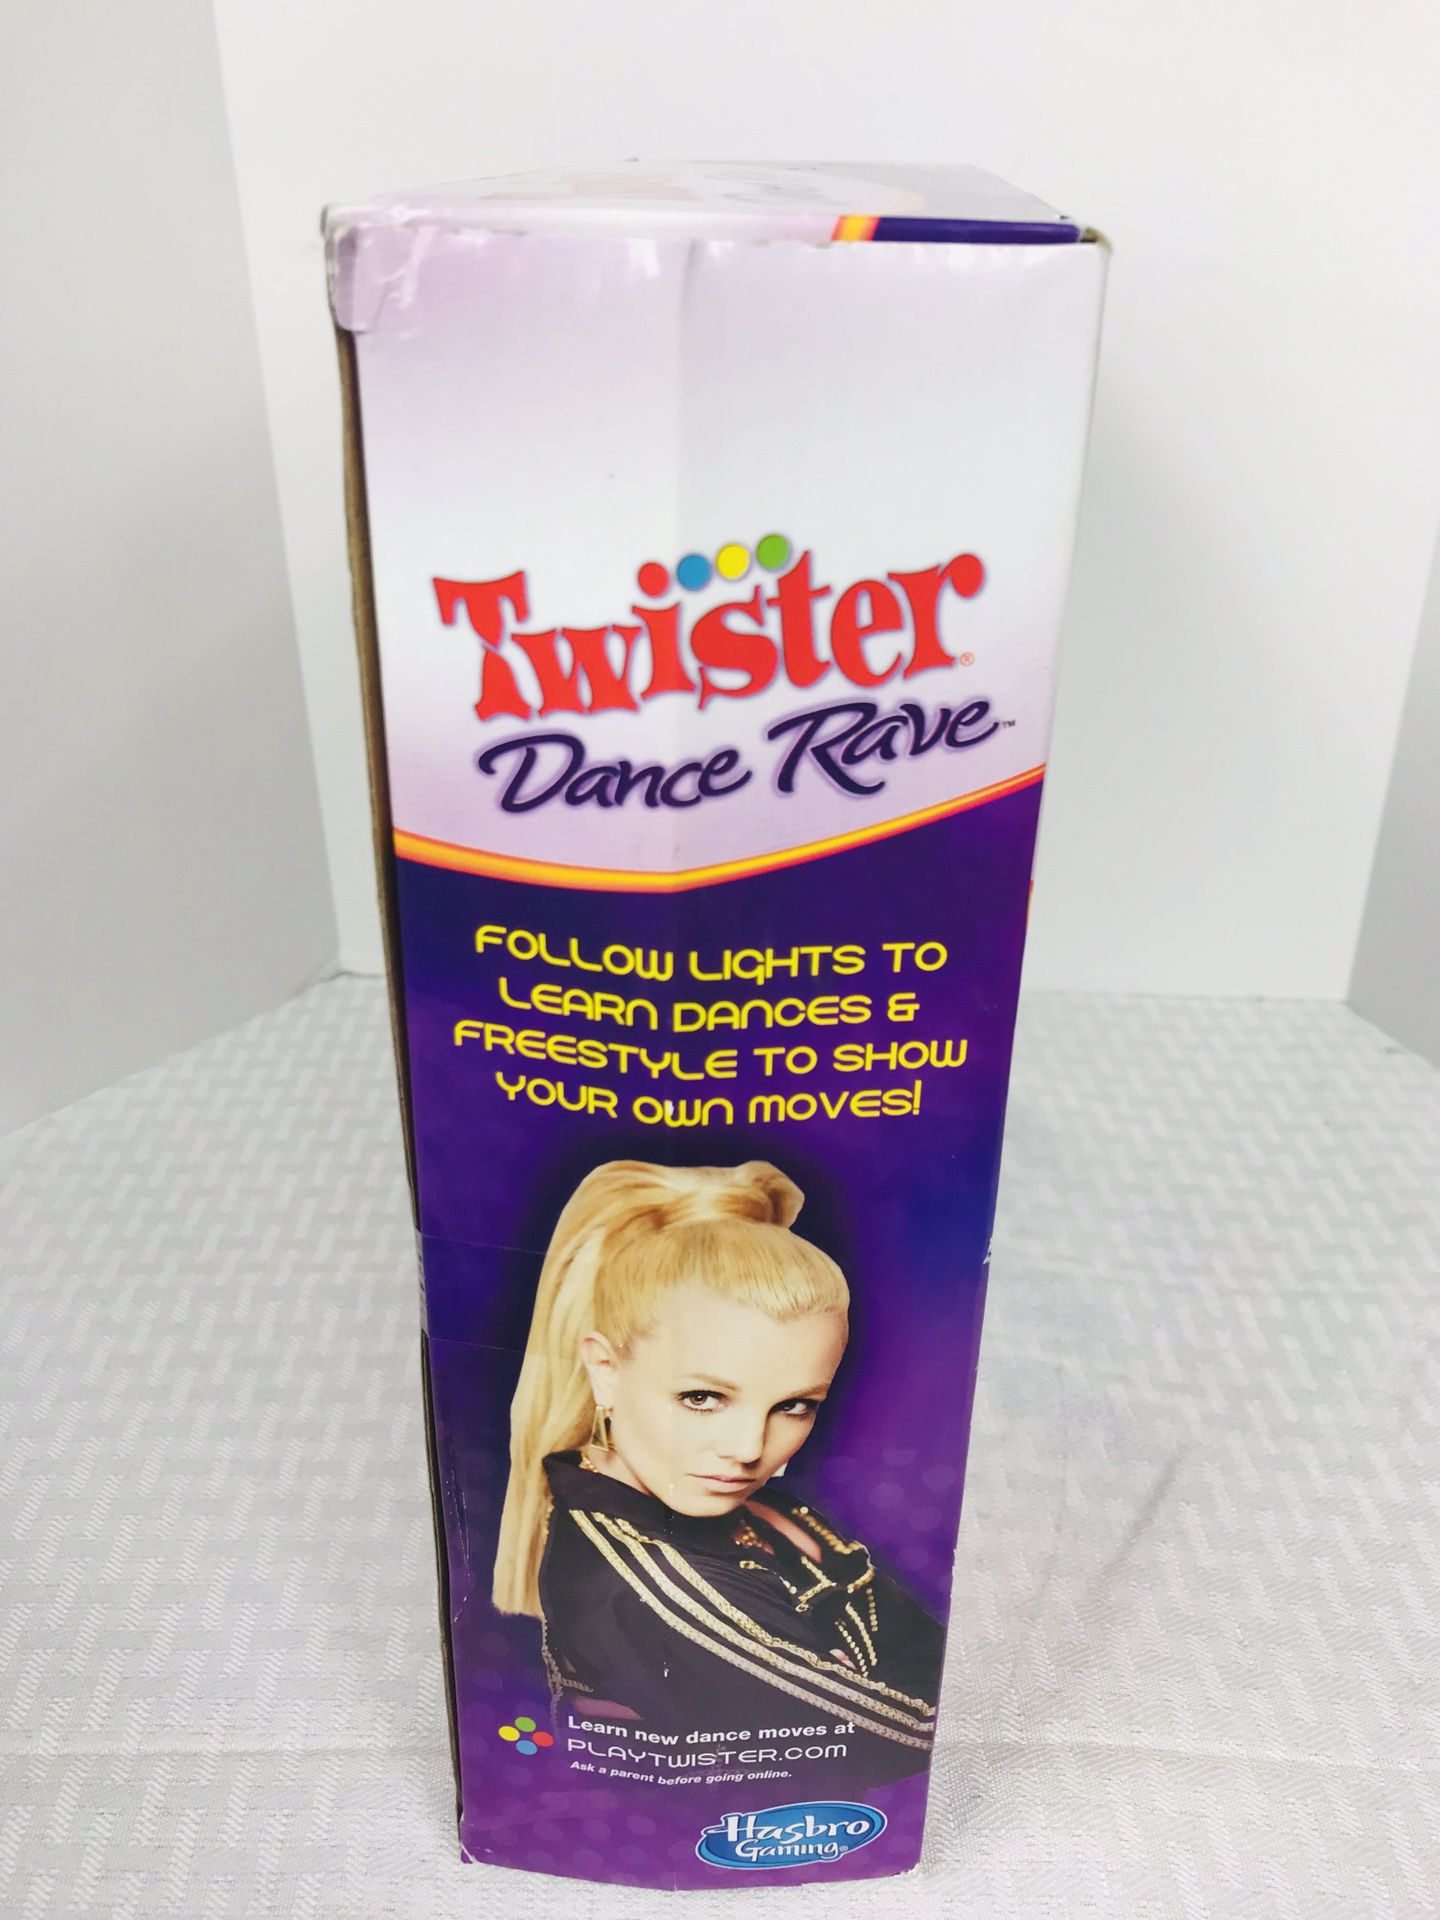 Britney Spears TWISTER Dance Rave Game